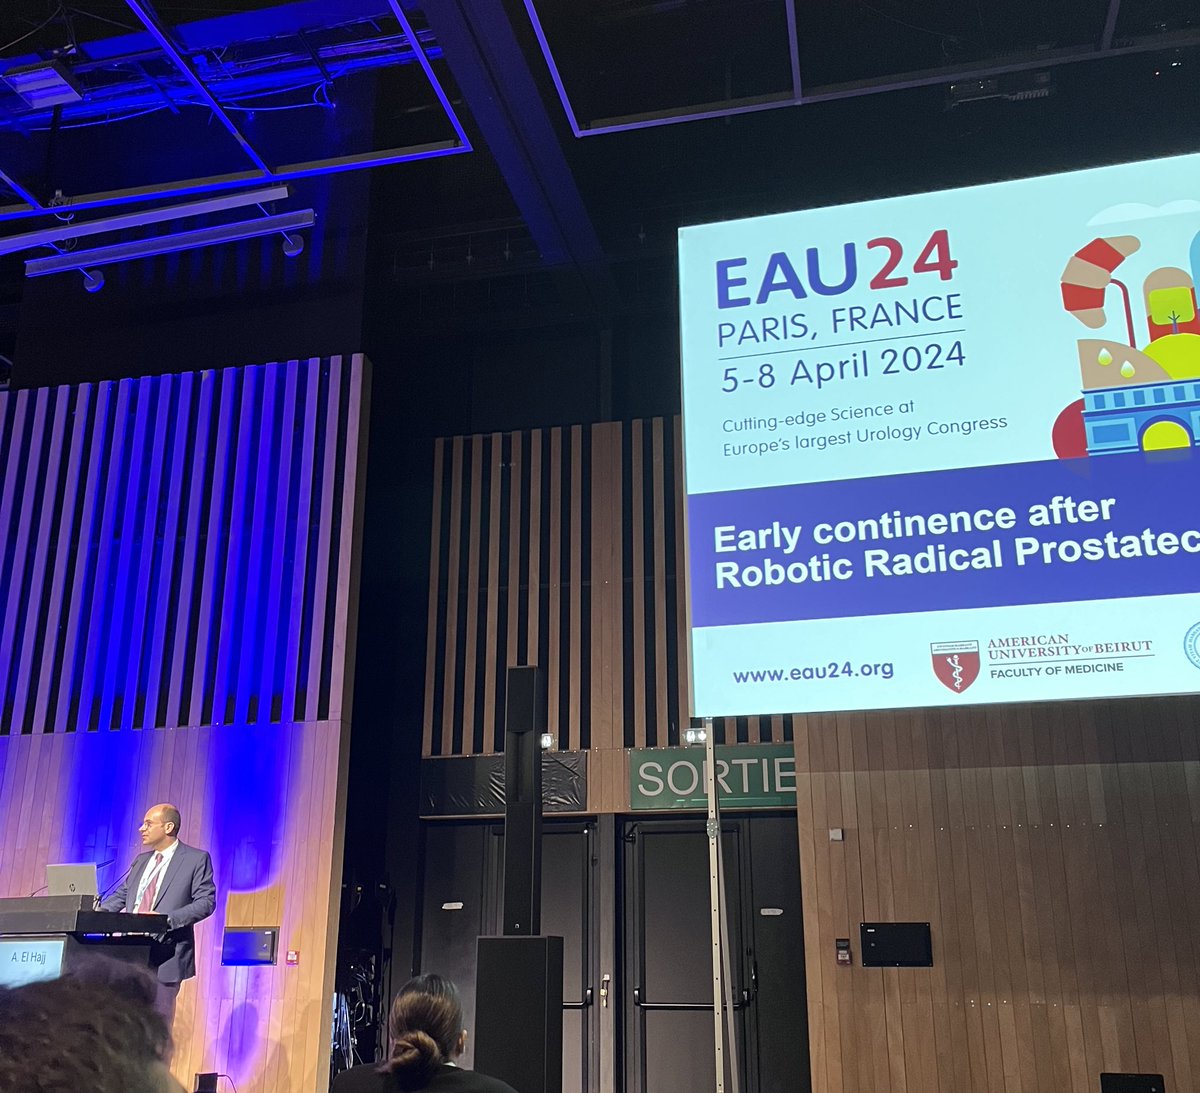 Dr. A Hajj presenting data on surgical techniques associated with early continence after RARP @DrAlbert @AubmcU #EAU24